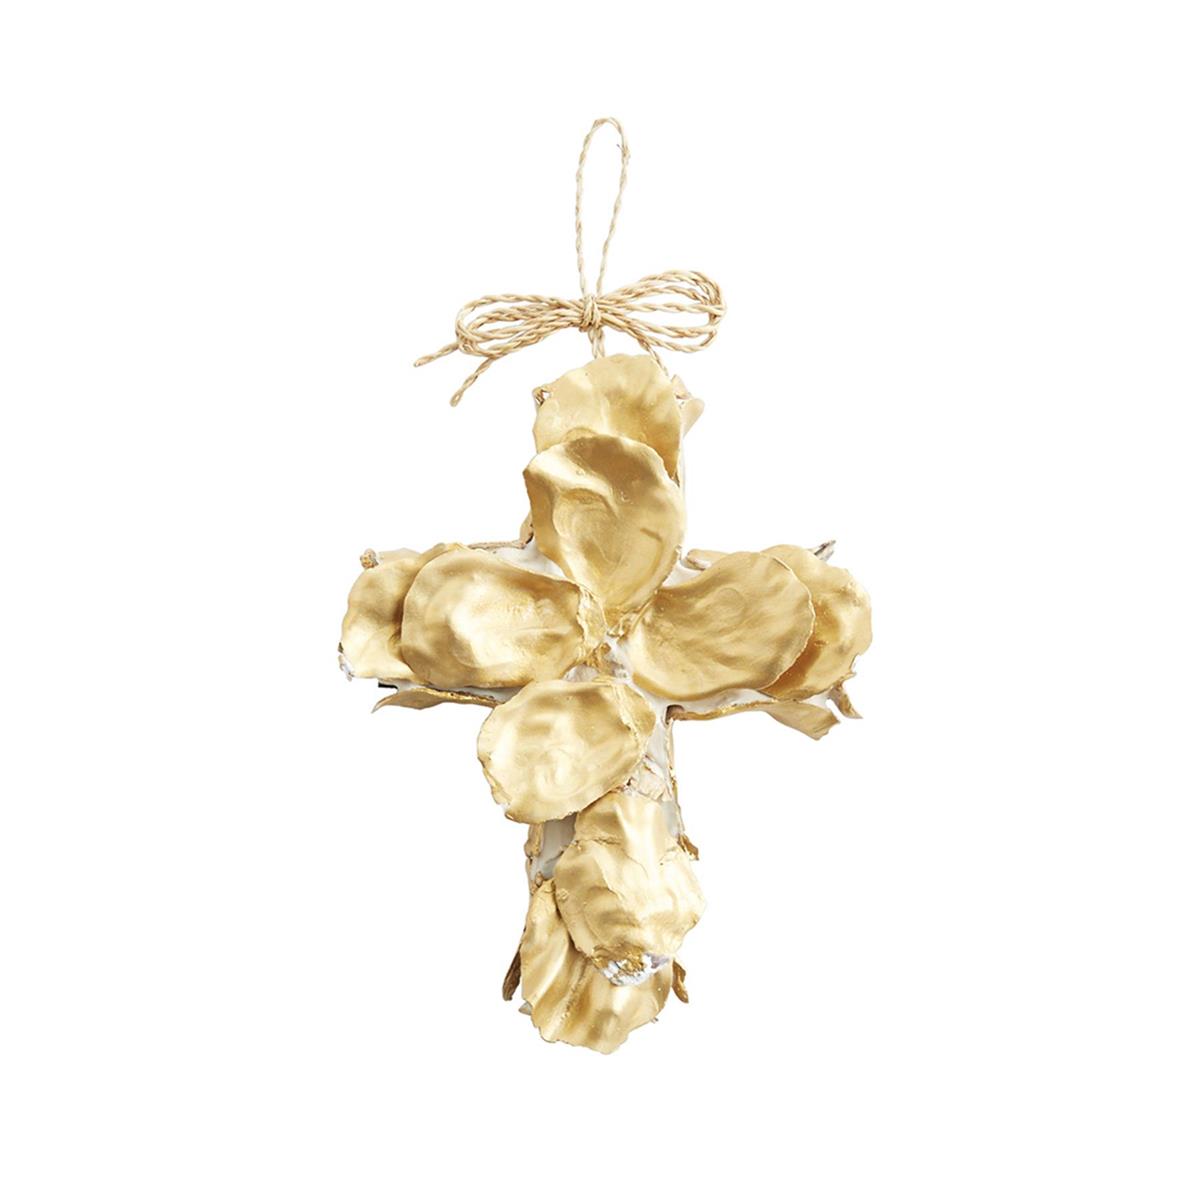 Gold Oyster Cross Ornament